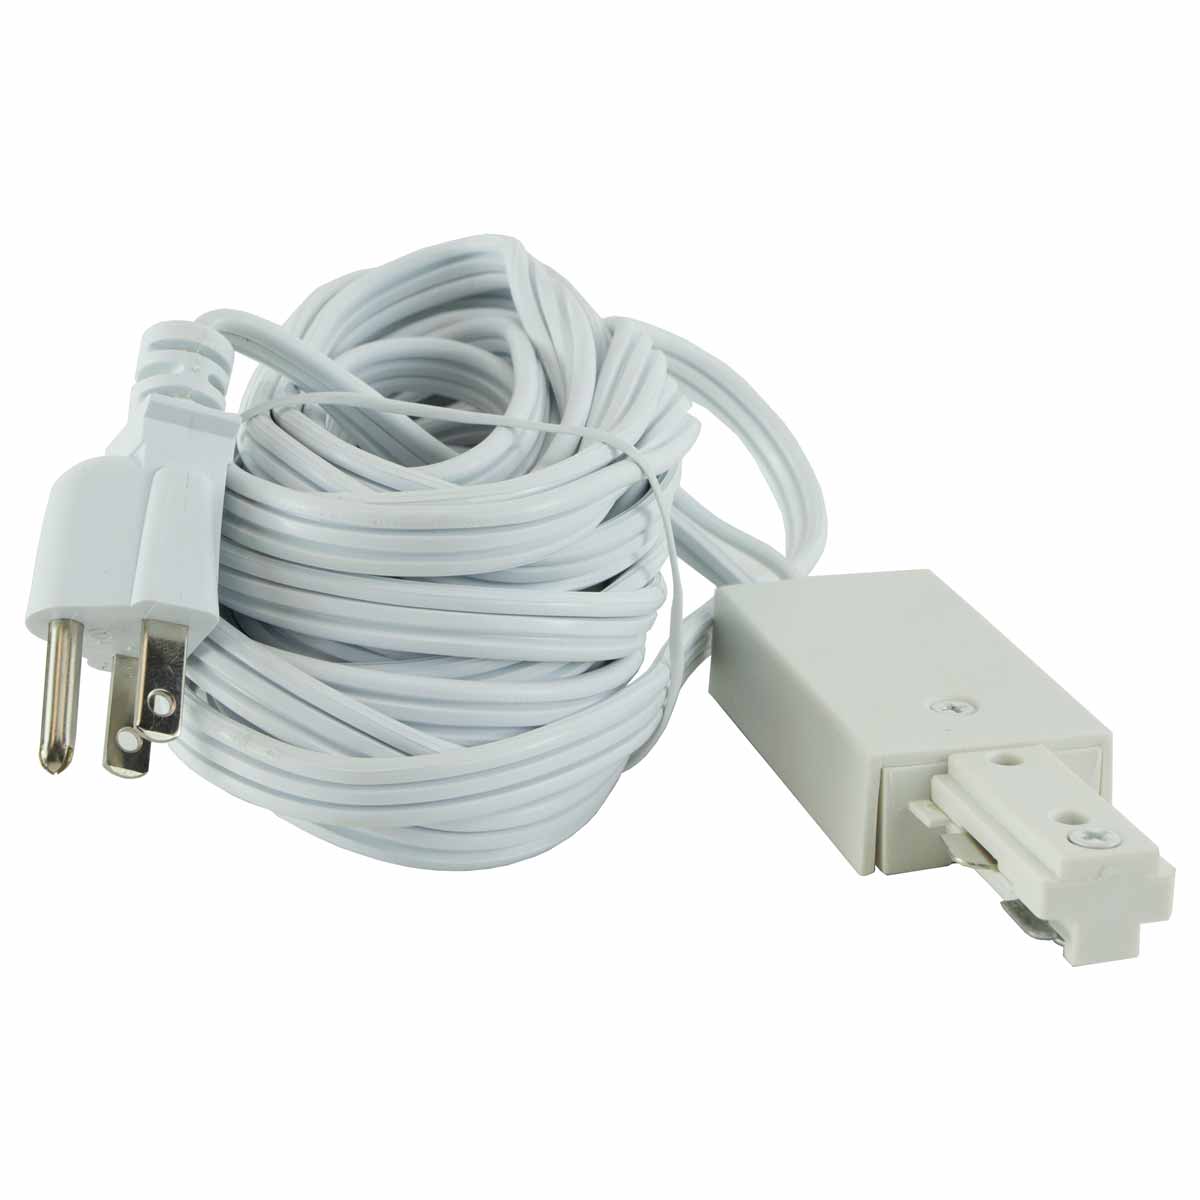 https://www.direct-lighting.com/resize/Shared/Images/Product/18FT-Cord-and-Plug-Set-For-Track-50088/50088-WH-H-track-single-circuit-18ft-plugin-power-cord-small.jpg?bw=1000&w=1000&bh=999&h=999